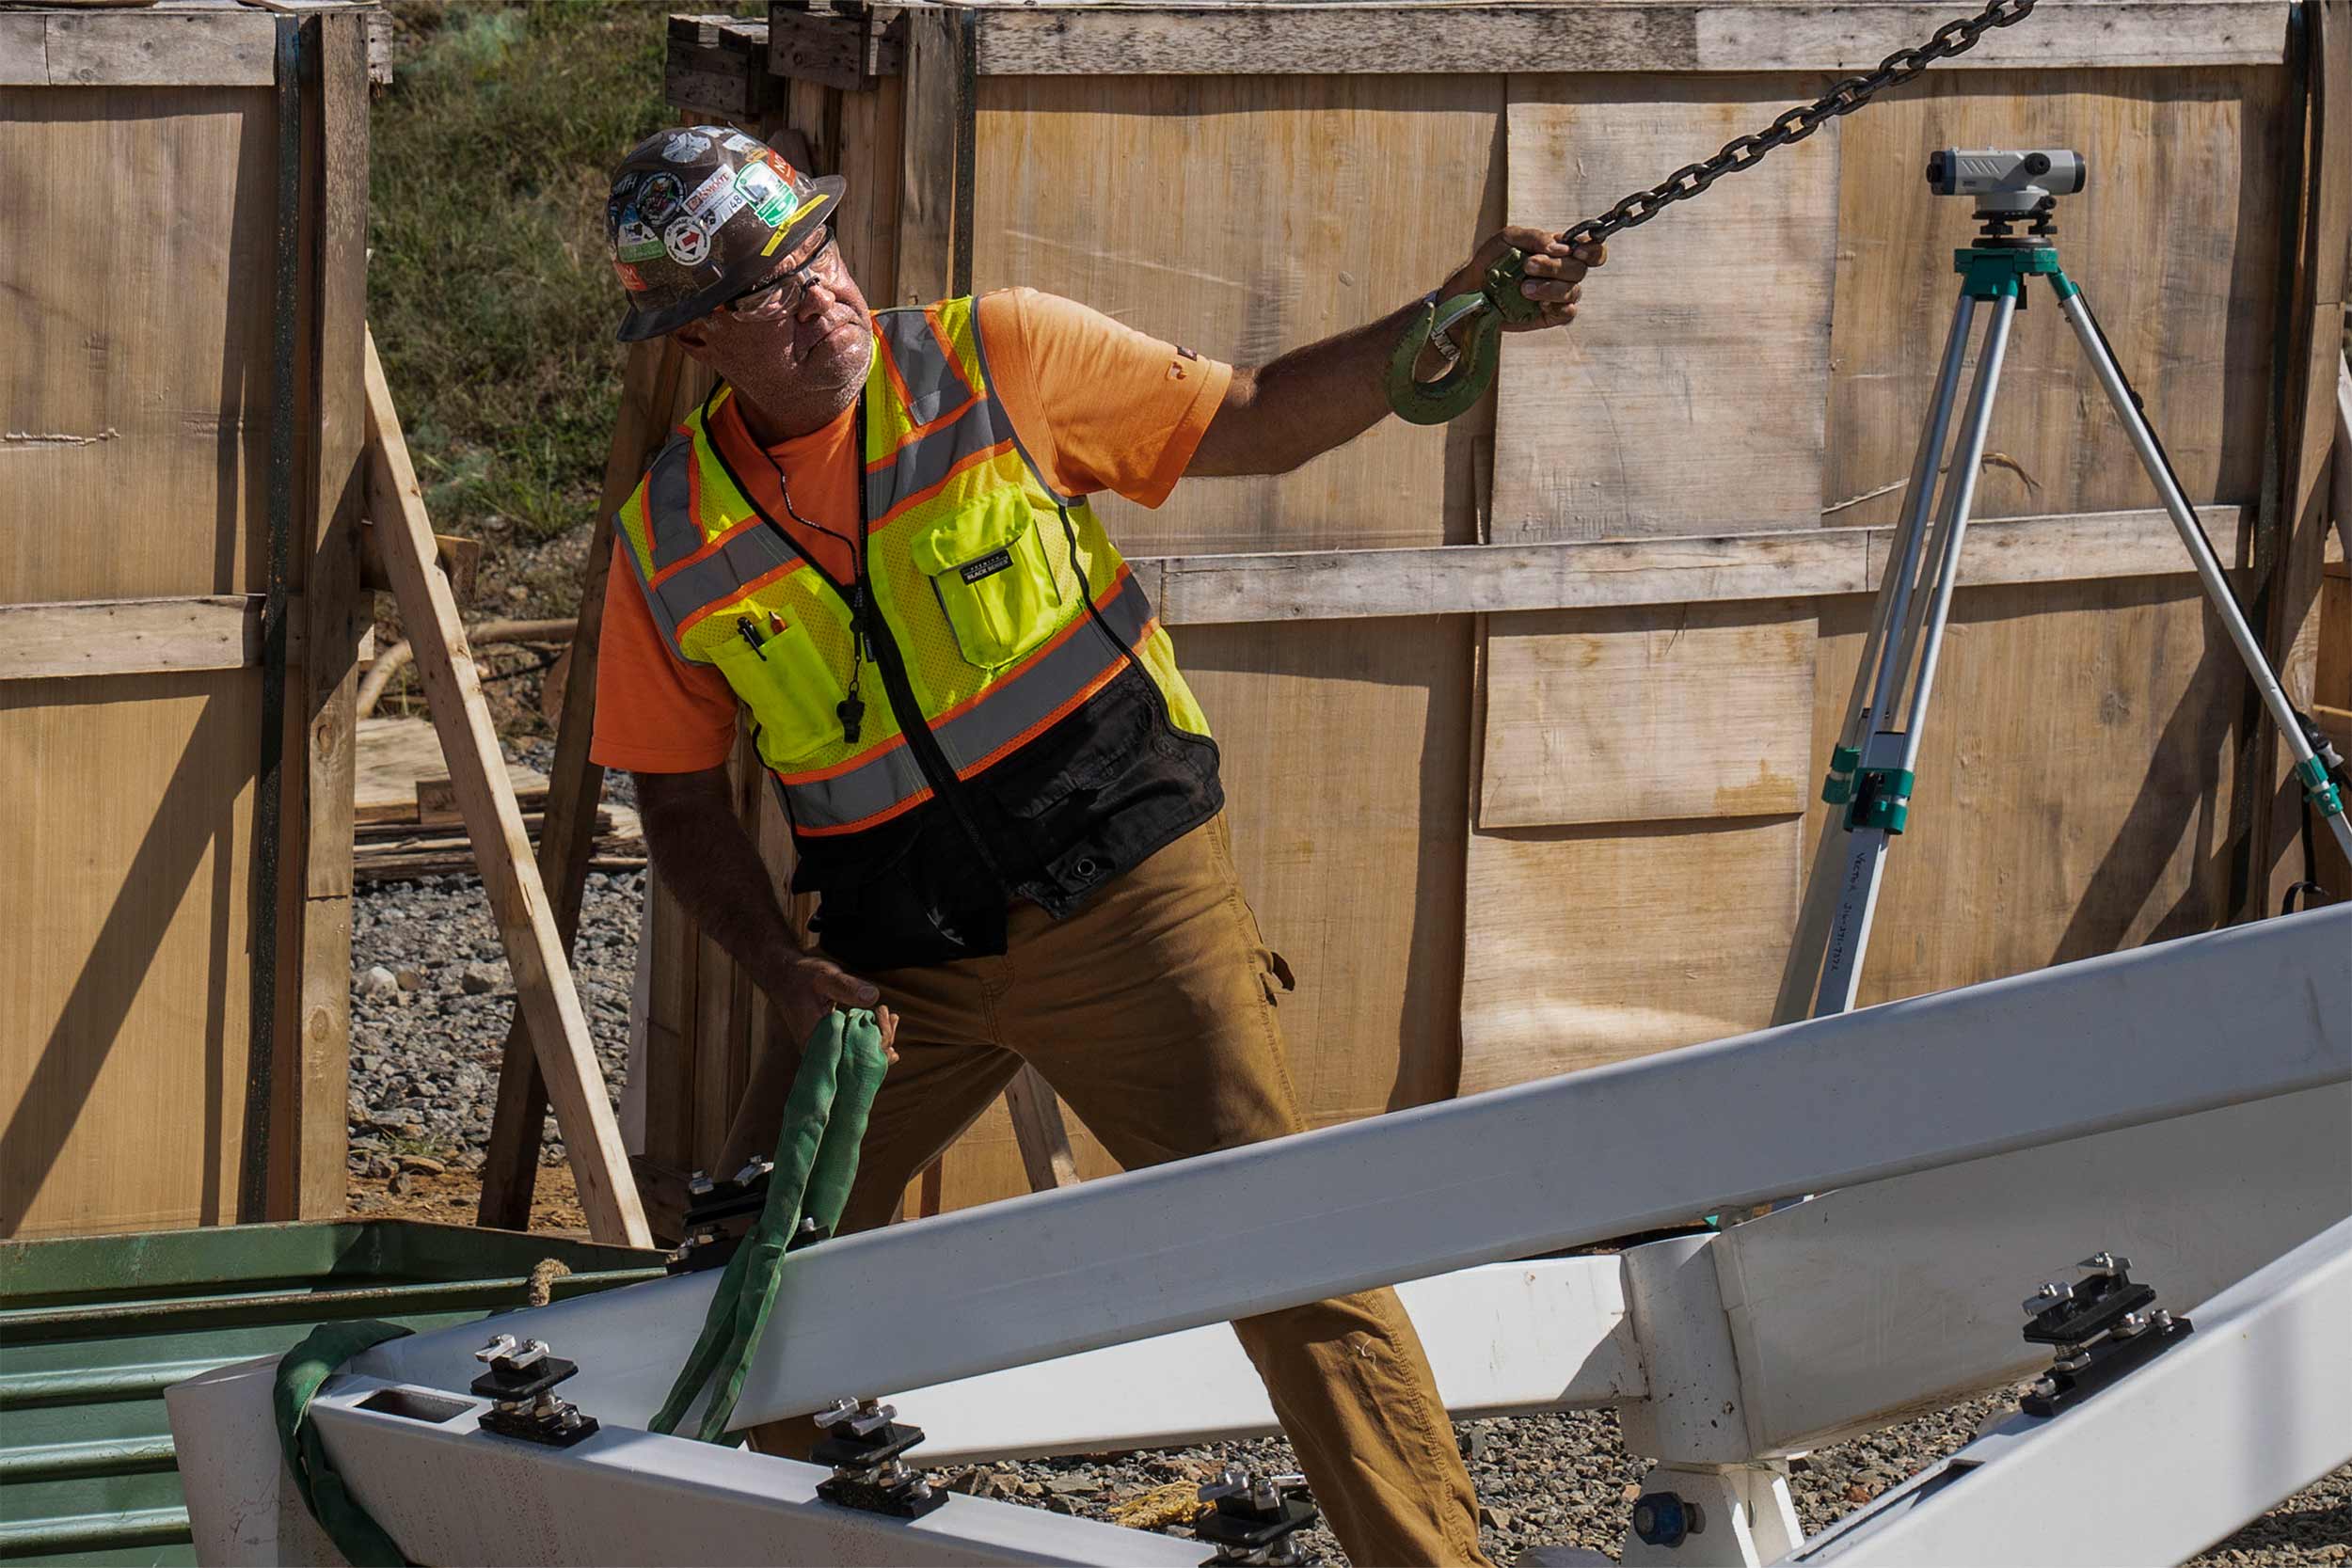 A construction worker in a safety vest and hard hat holds a large hook on a chain in one hand and a strap secured around the corner of a frame in the other